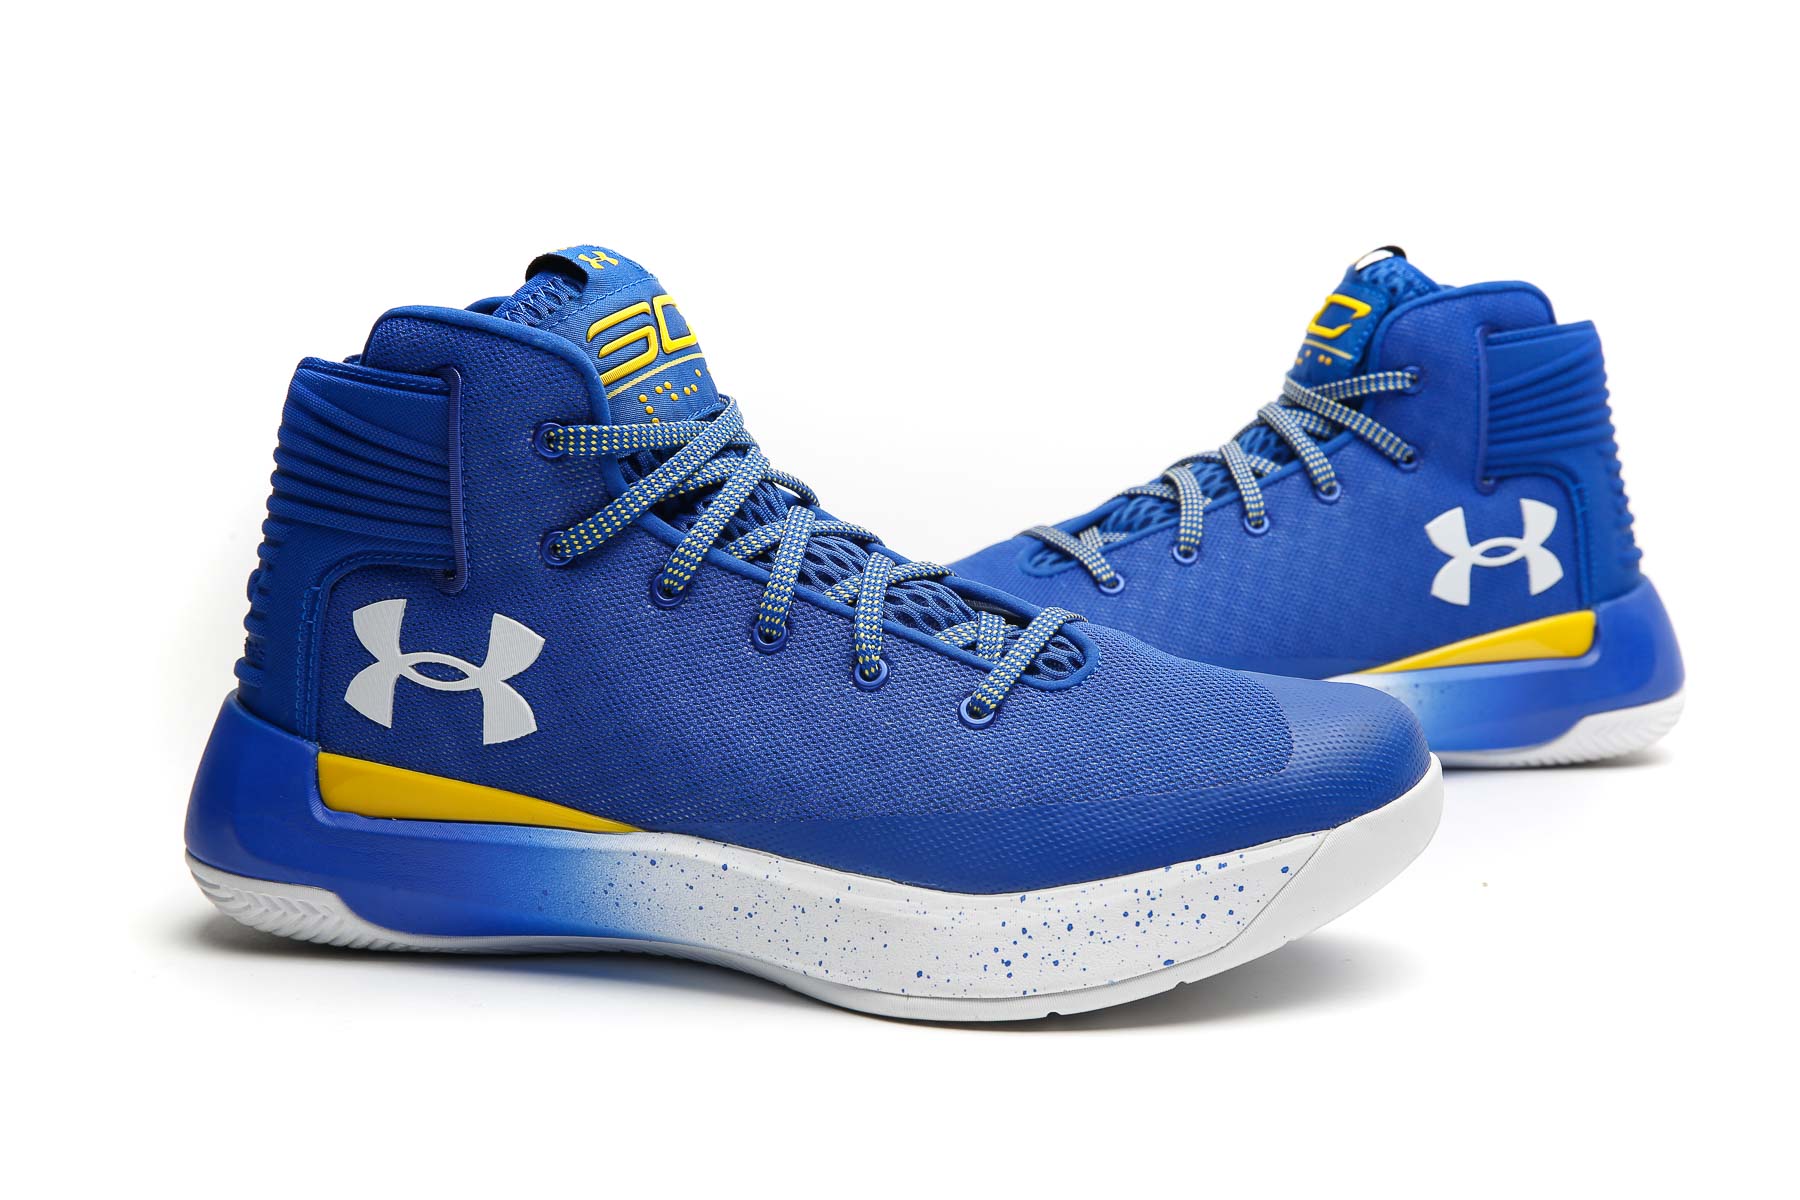 under armour-curry 3zer0-review-8 